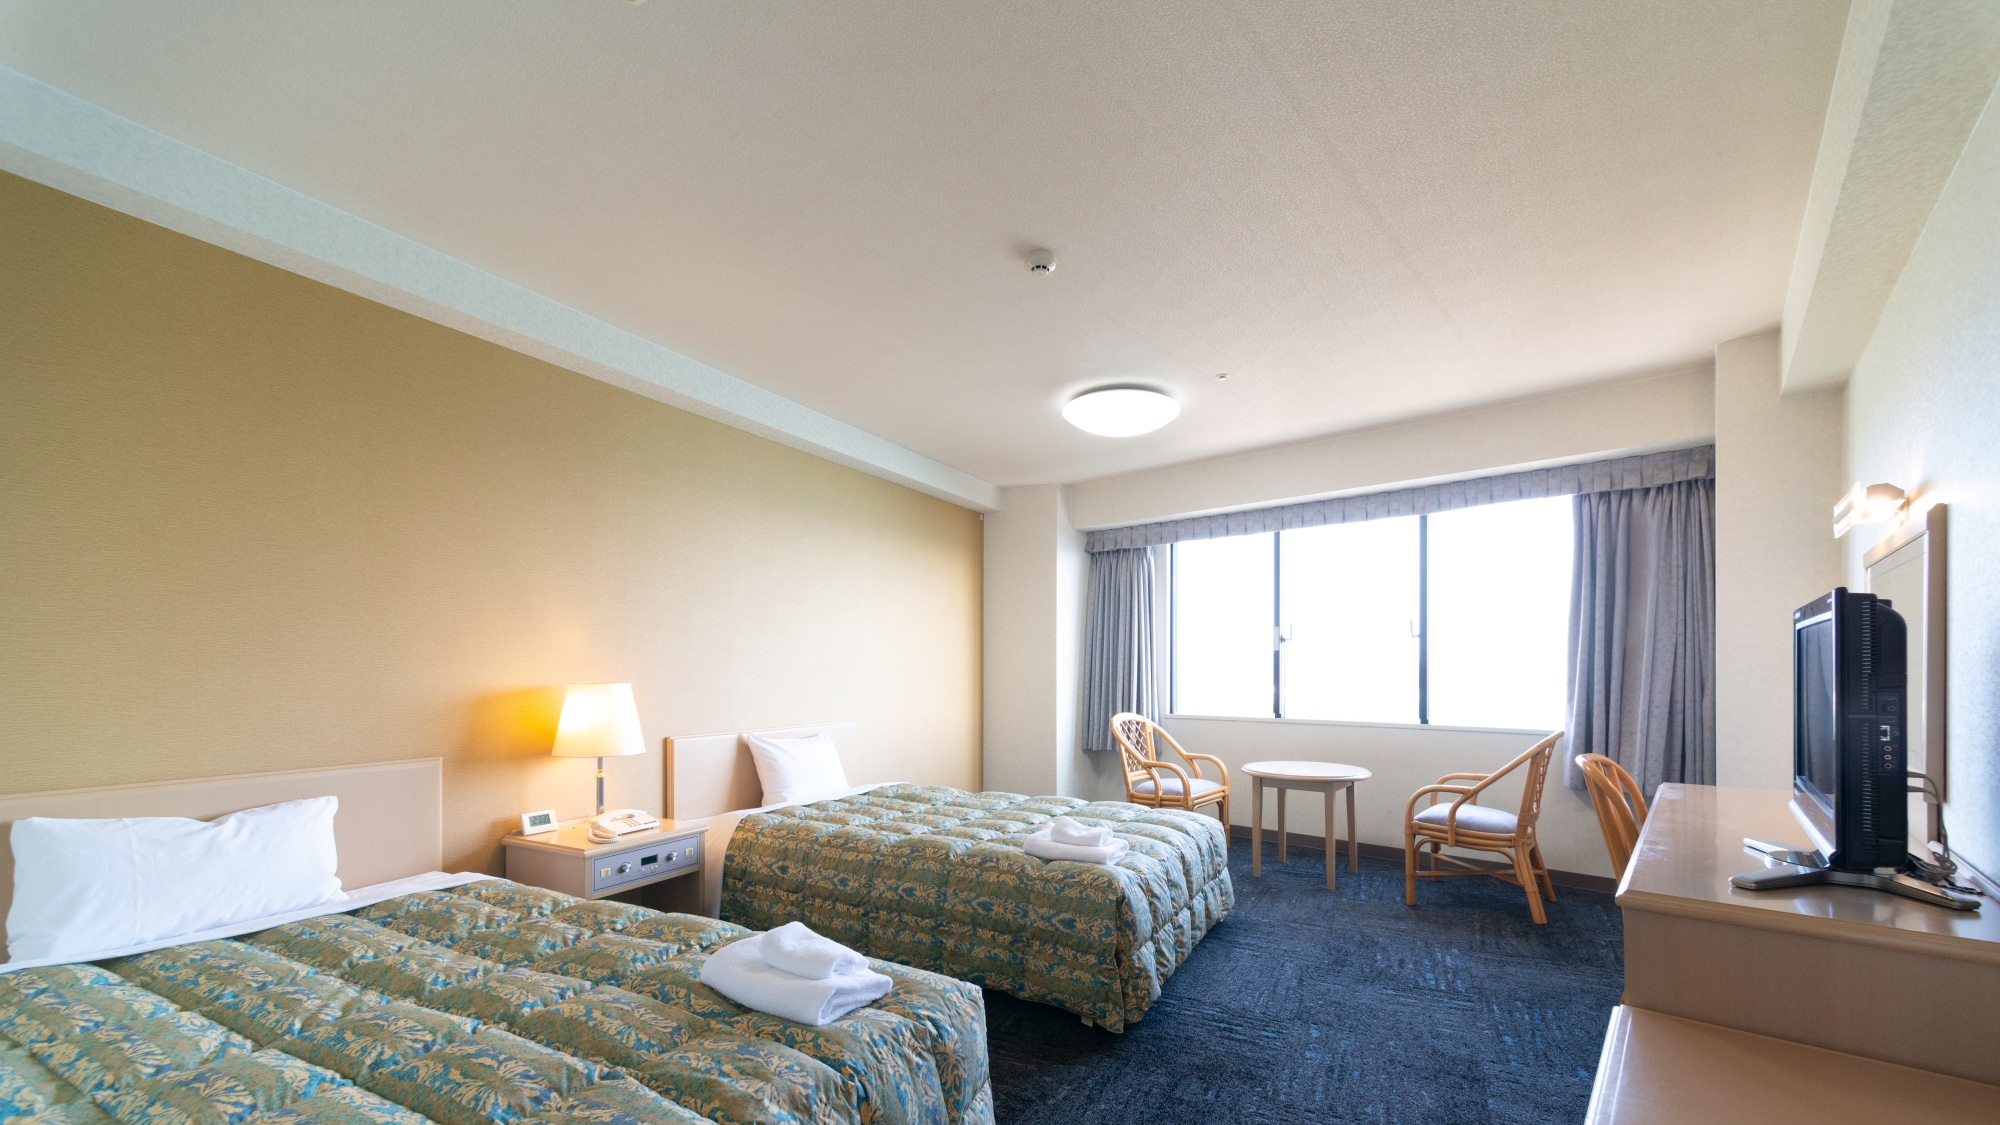 [Light Twin] A room of 30㎡ for 1 or 2 people. Comfortable from business to traveling alone ♪